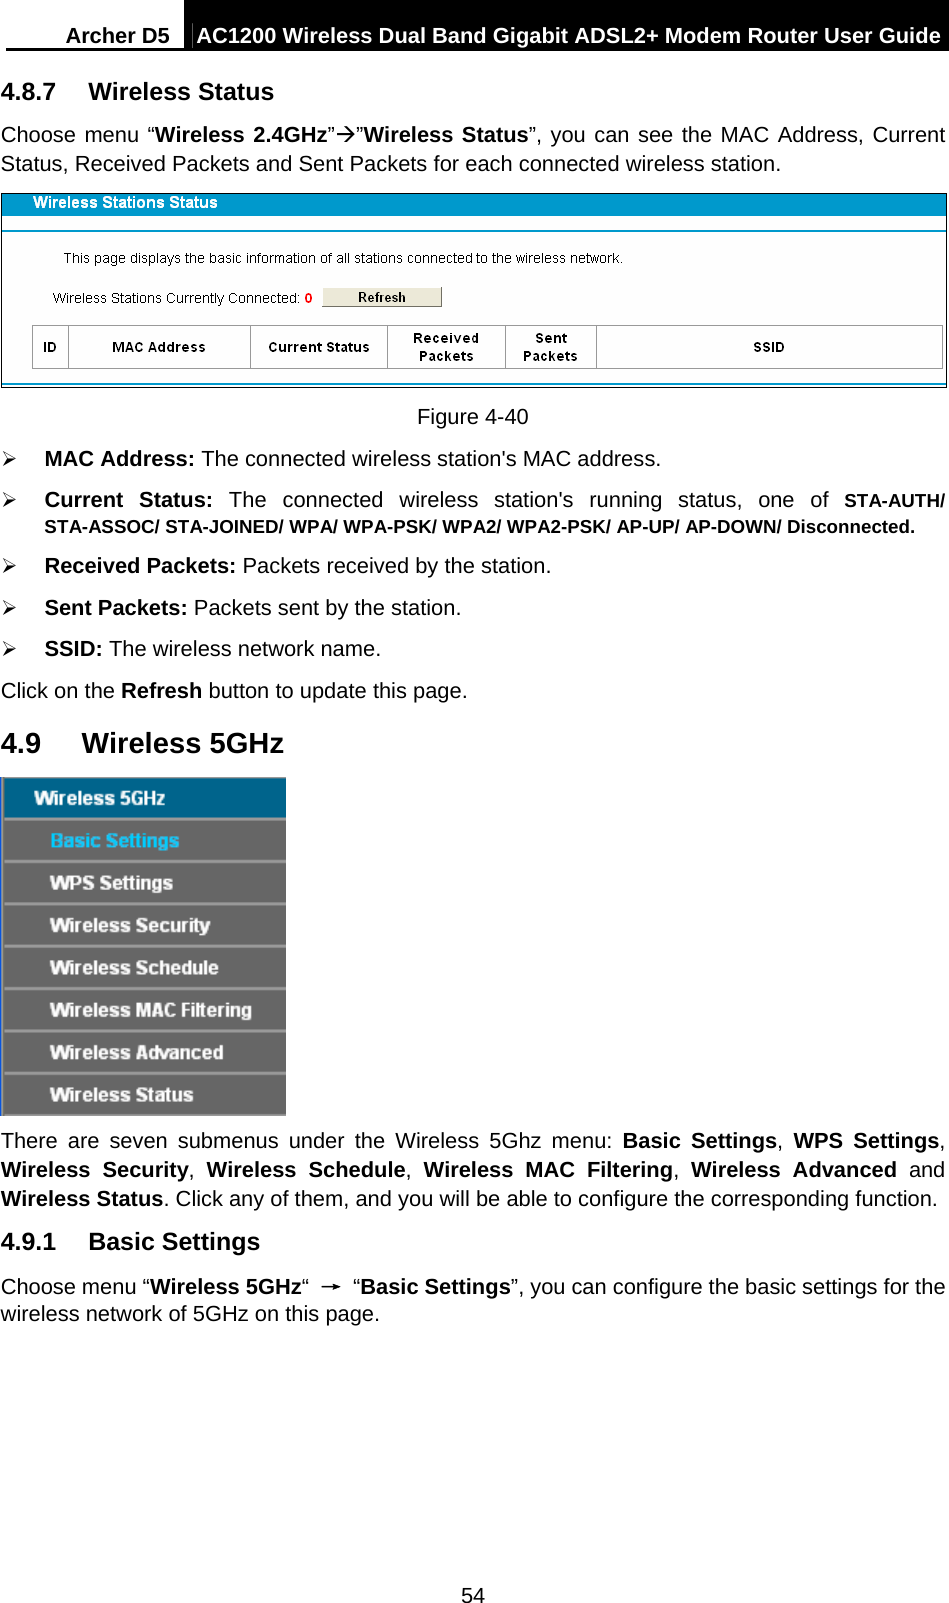 Archer D5  AC1200 Wireless Dual Band Gigabit ADSL2+ Modem Router User Guide 54 4.8.7  Wireless Status Choose menu “Wireless 2.4GHz””Wireless Status”, you can see the MAC Address, Current Status, Received Packets and Sent Packets for each connected wireless station.  Figure 4-40  MAC Address: The connected wireless station&apos;s MAC address.  Current Status: The connected wireless station&apos;s running status, one of STA-AUTH/ STA-ASSOC/ STA-JOINED/ WPA/ WPA-PSK/ WPA2/ WPA2-PSK/ AP-UP/ AP-DOWN/ Disconnected.  Received Packets: Packets received by the station.  Sent Packets: Packets sent by the station.  SSID: The wireless network name. Click on the Refresh button to update this page.   4.9  Wireless 5GHz  There are seven submenus under the Wireless 5Ghz menu: Basic Settings,  WPS Settings, Wireless Security, Wireless Schedule,  Wireless MAC Filtering,  Wireless Advanced and Wireless Status. Click any of them, and you will be able to configure the corresponding function.   4.9.1  Basic Settings Choose menu “Wireless 5GHz“ → “Basic Settings”, you can configure the basic settings for the wireless network of 5GHz on this page. 